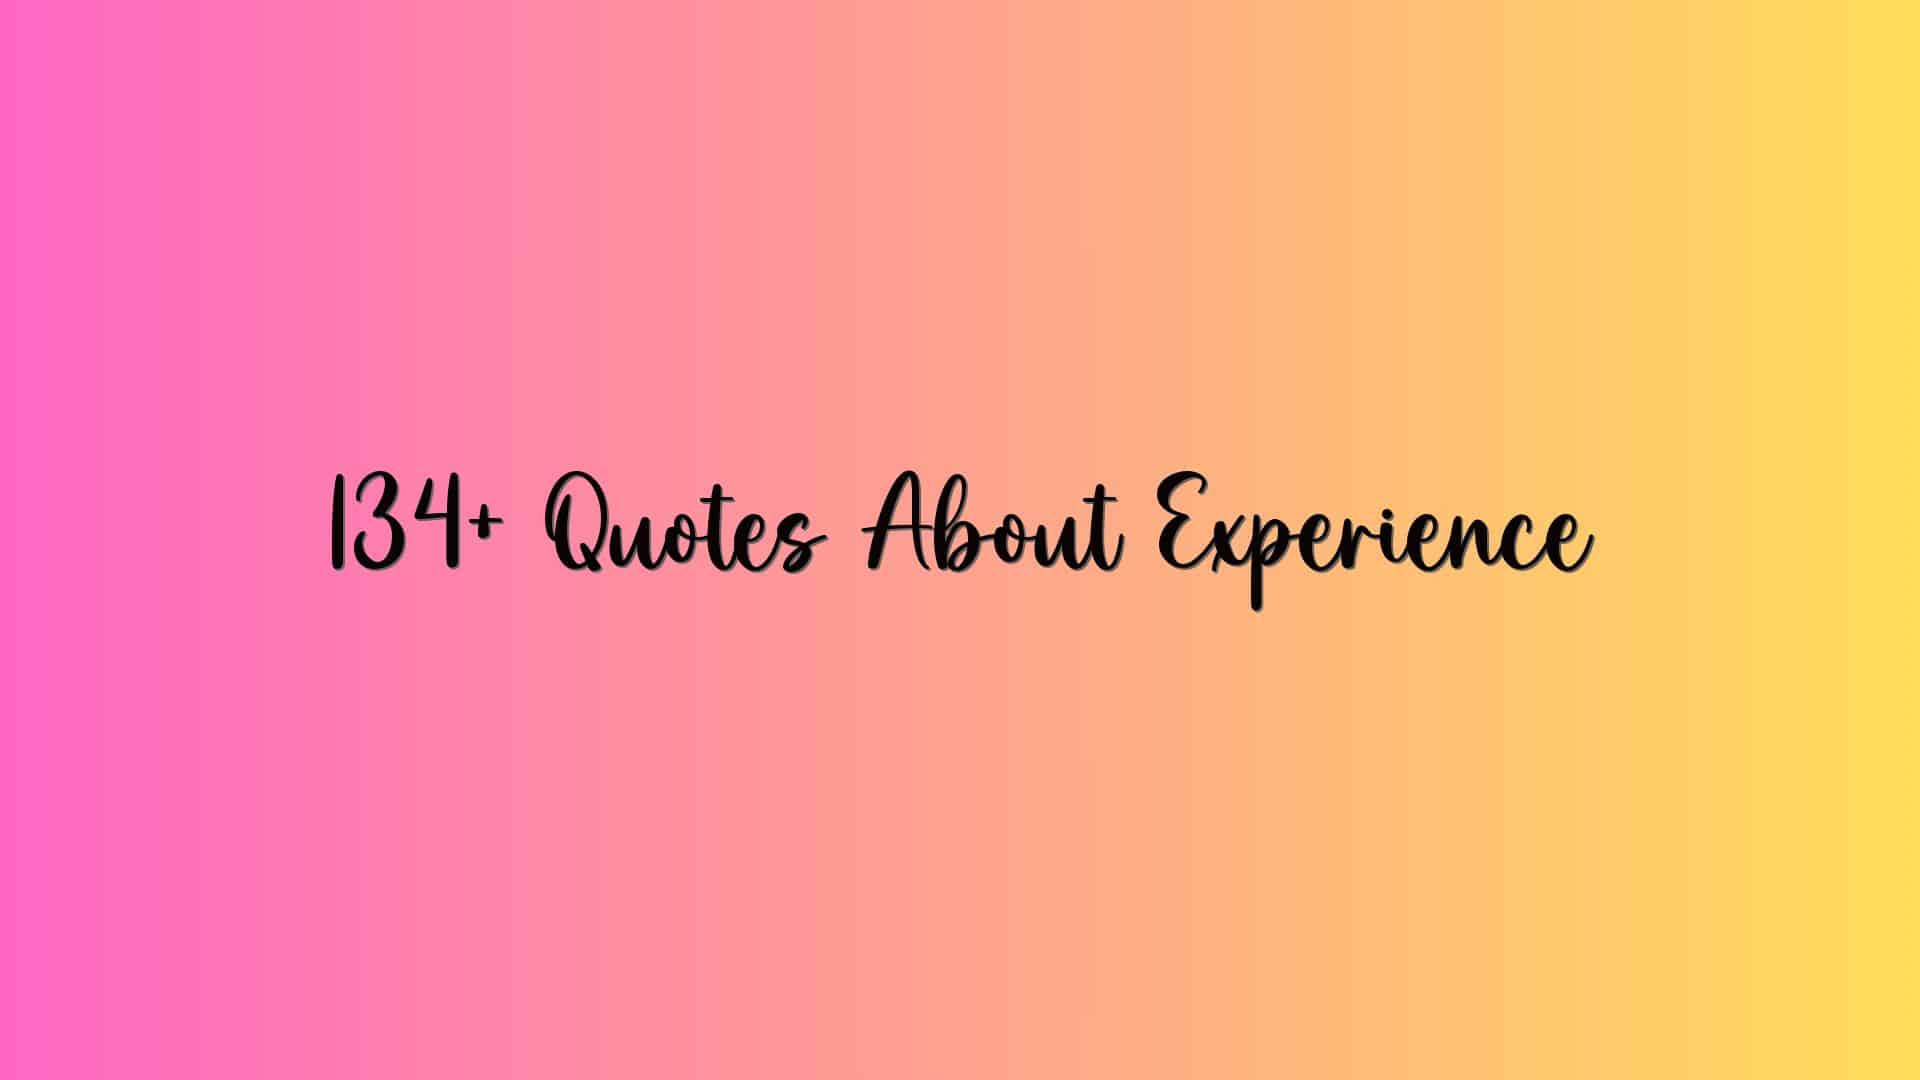 134+ Quotes About Experience